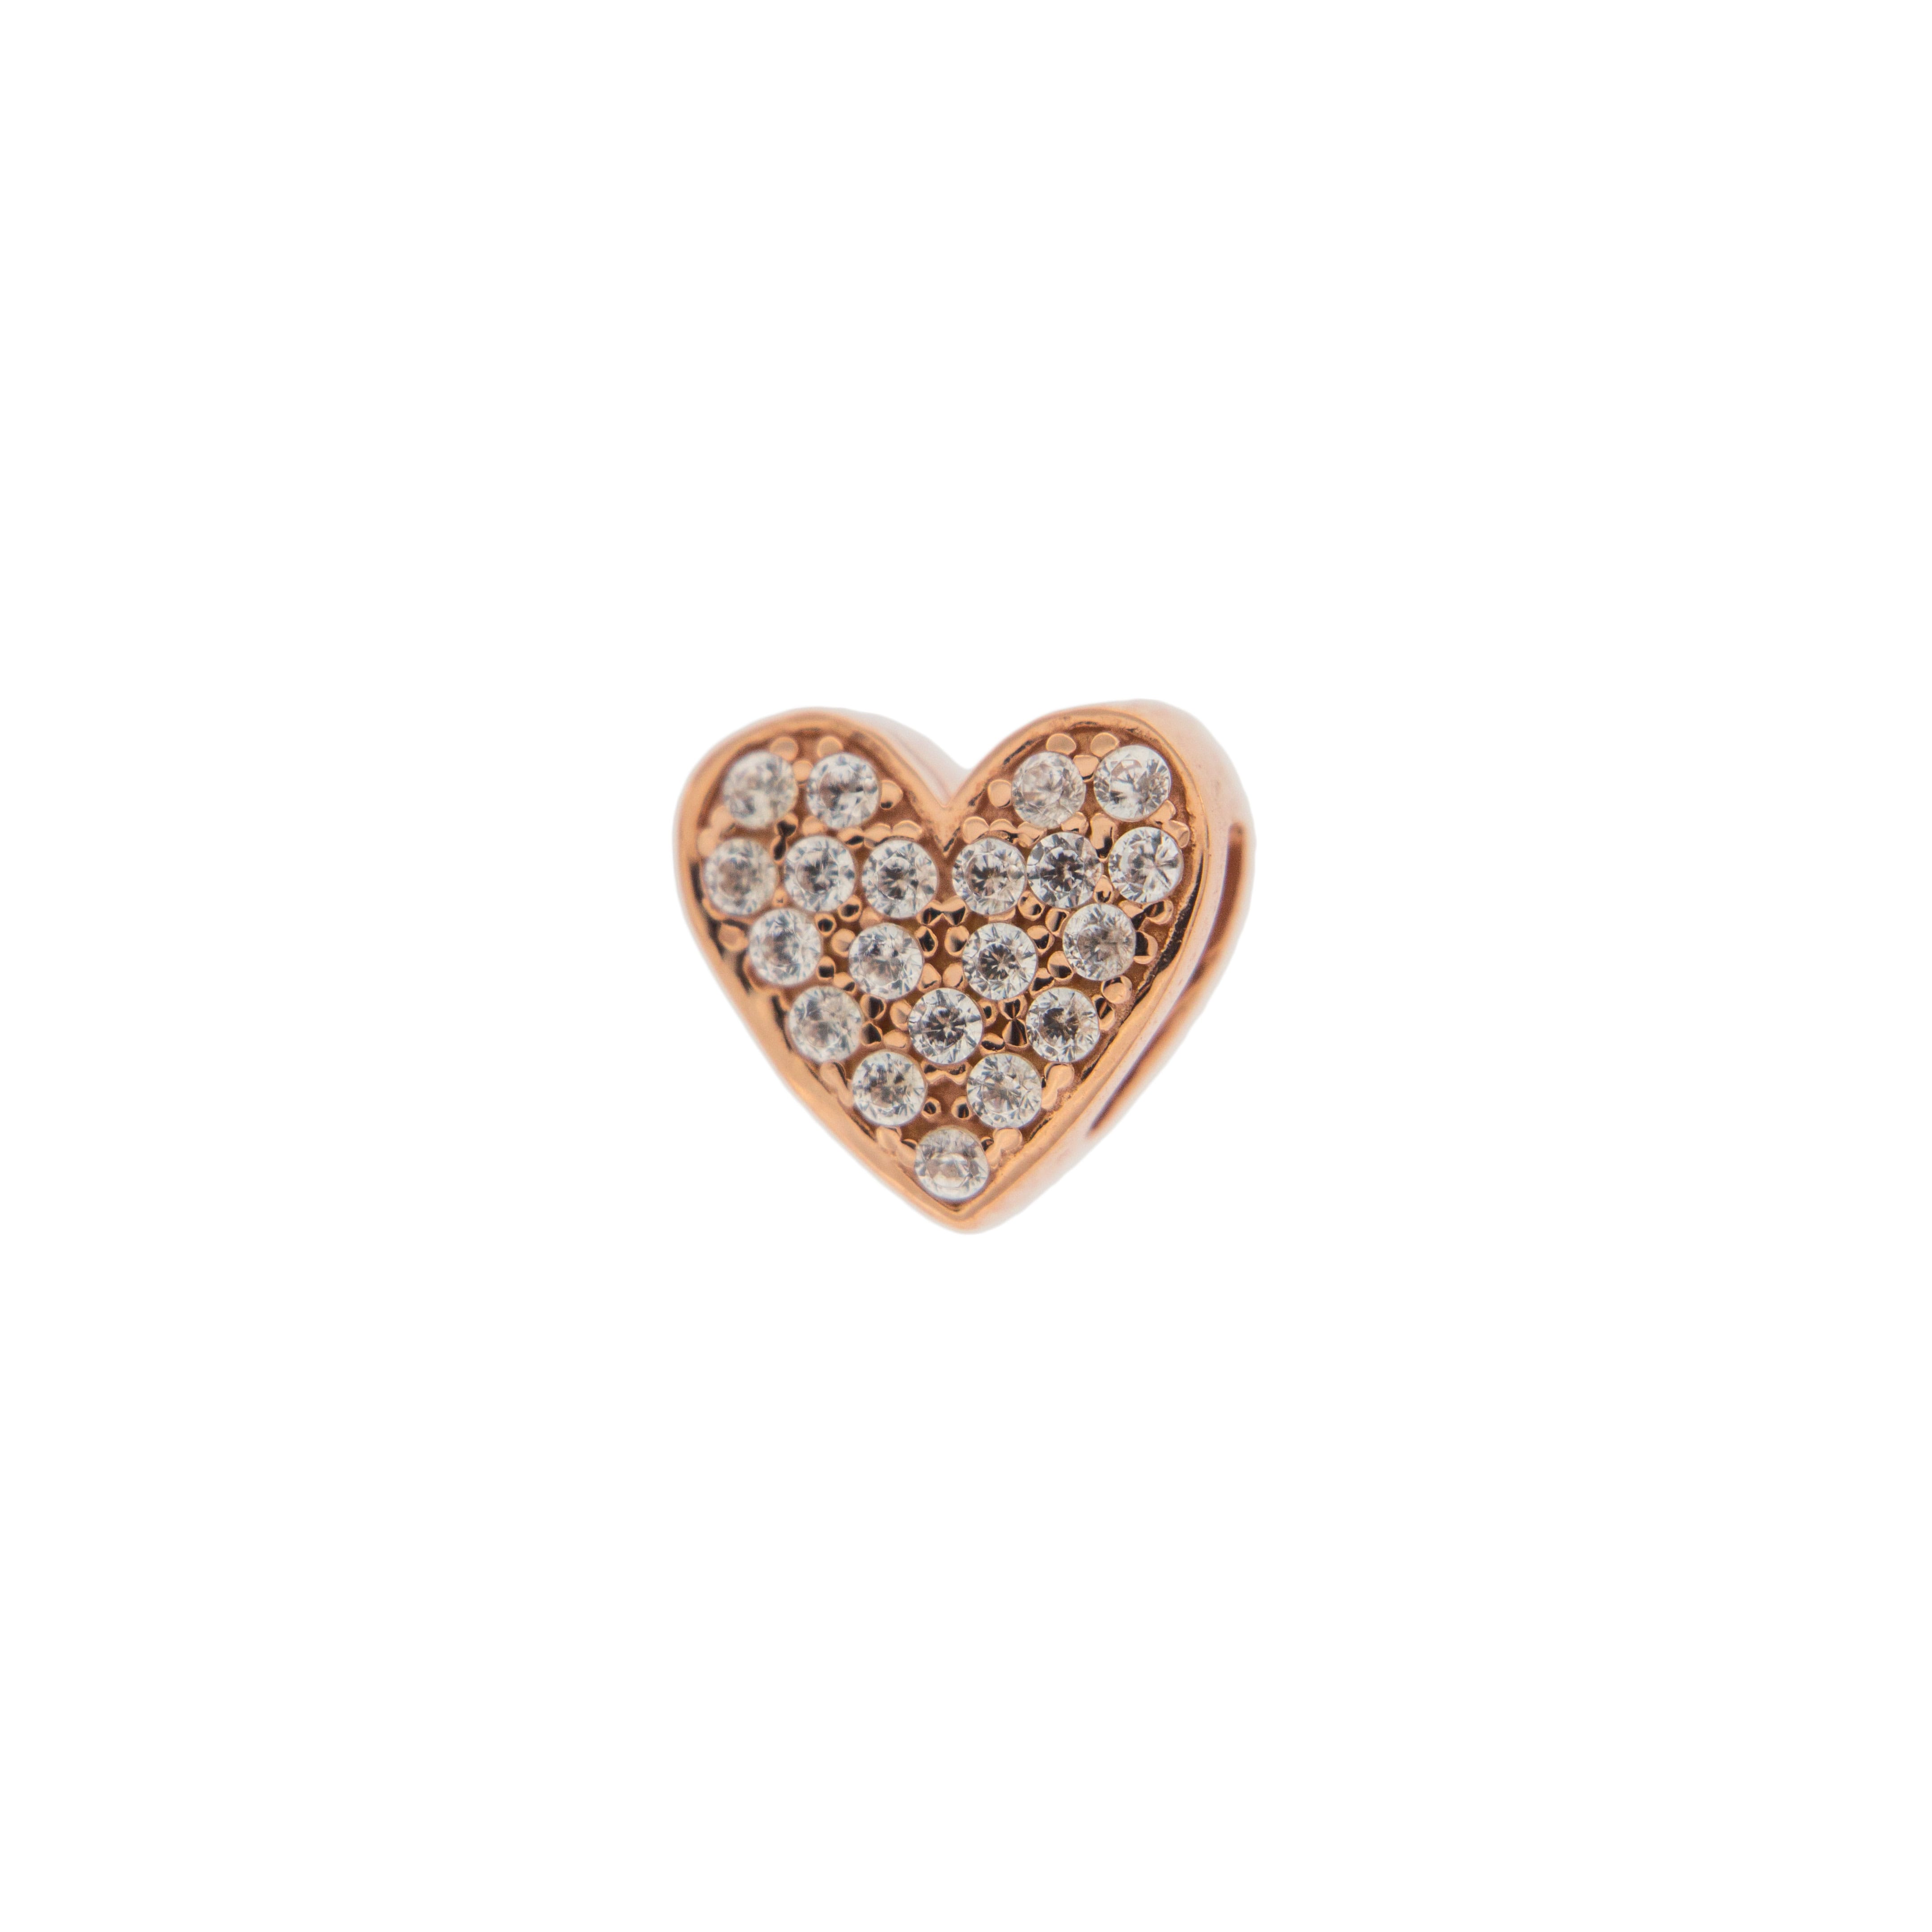 Moments - Moment Heart with Zircon for Carousel Bracelet and Choker - 1 | Rue des Mille